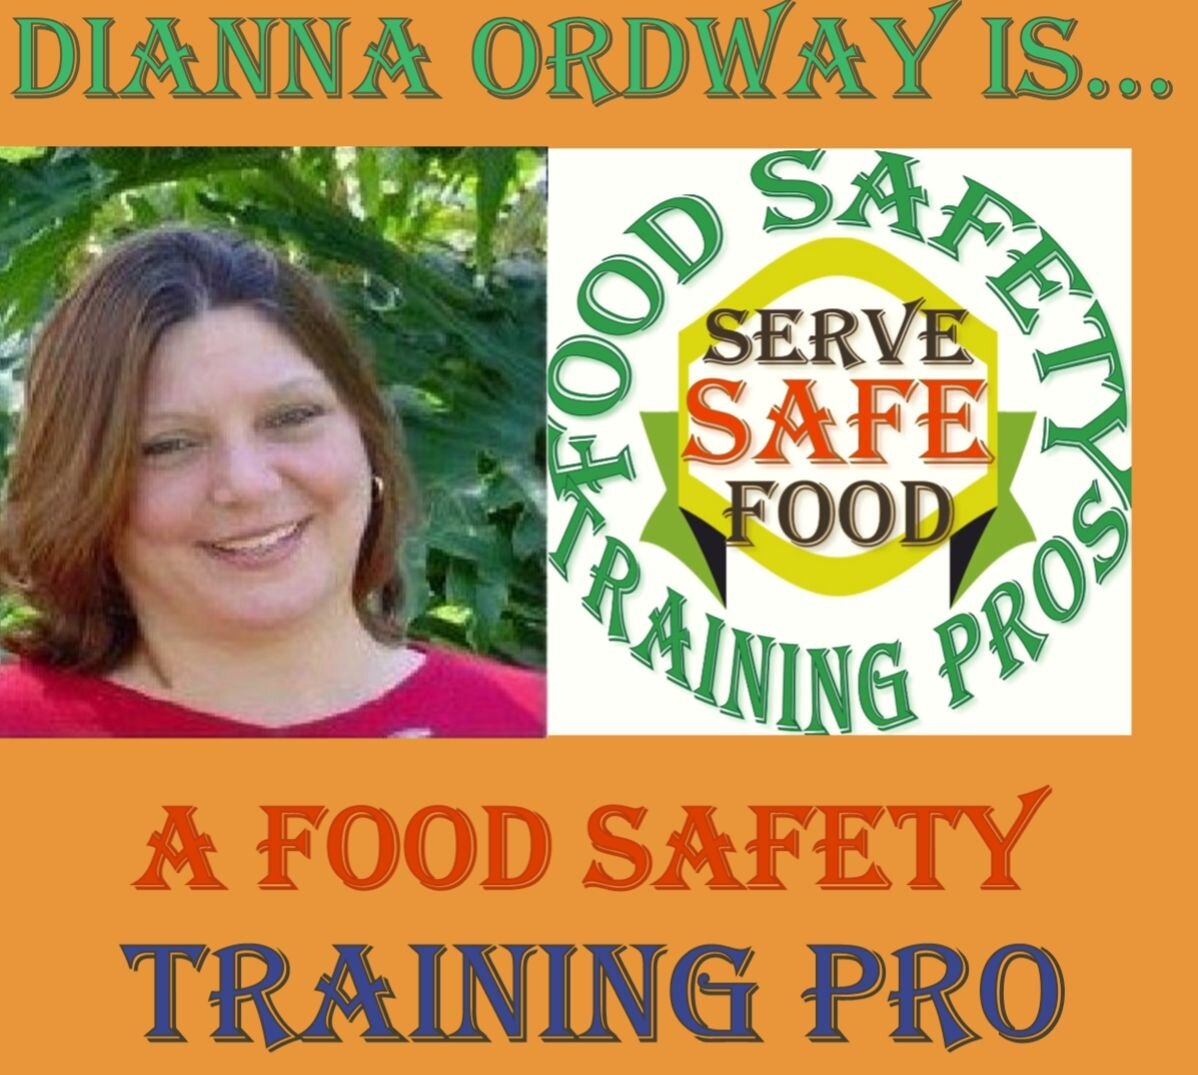 Check out http://t.co/1XDXguPke3 4 all of Ur Food Protection Manager training session & exam needs & our coupon specials! 888-485-1352